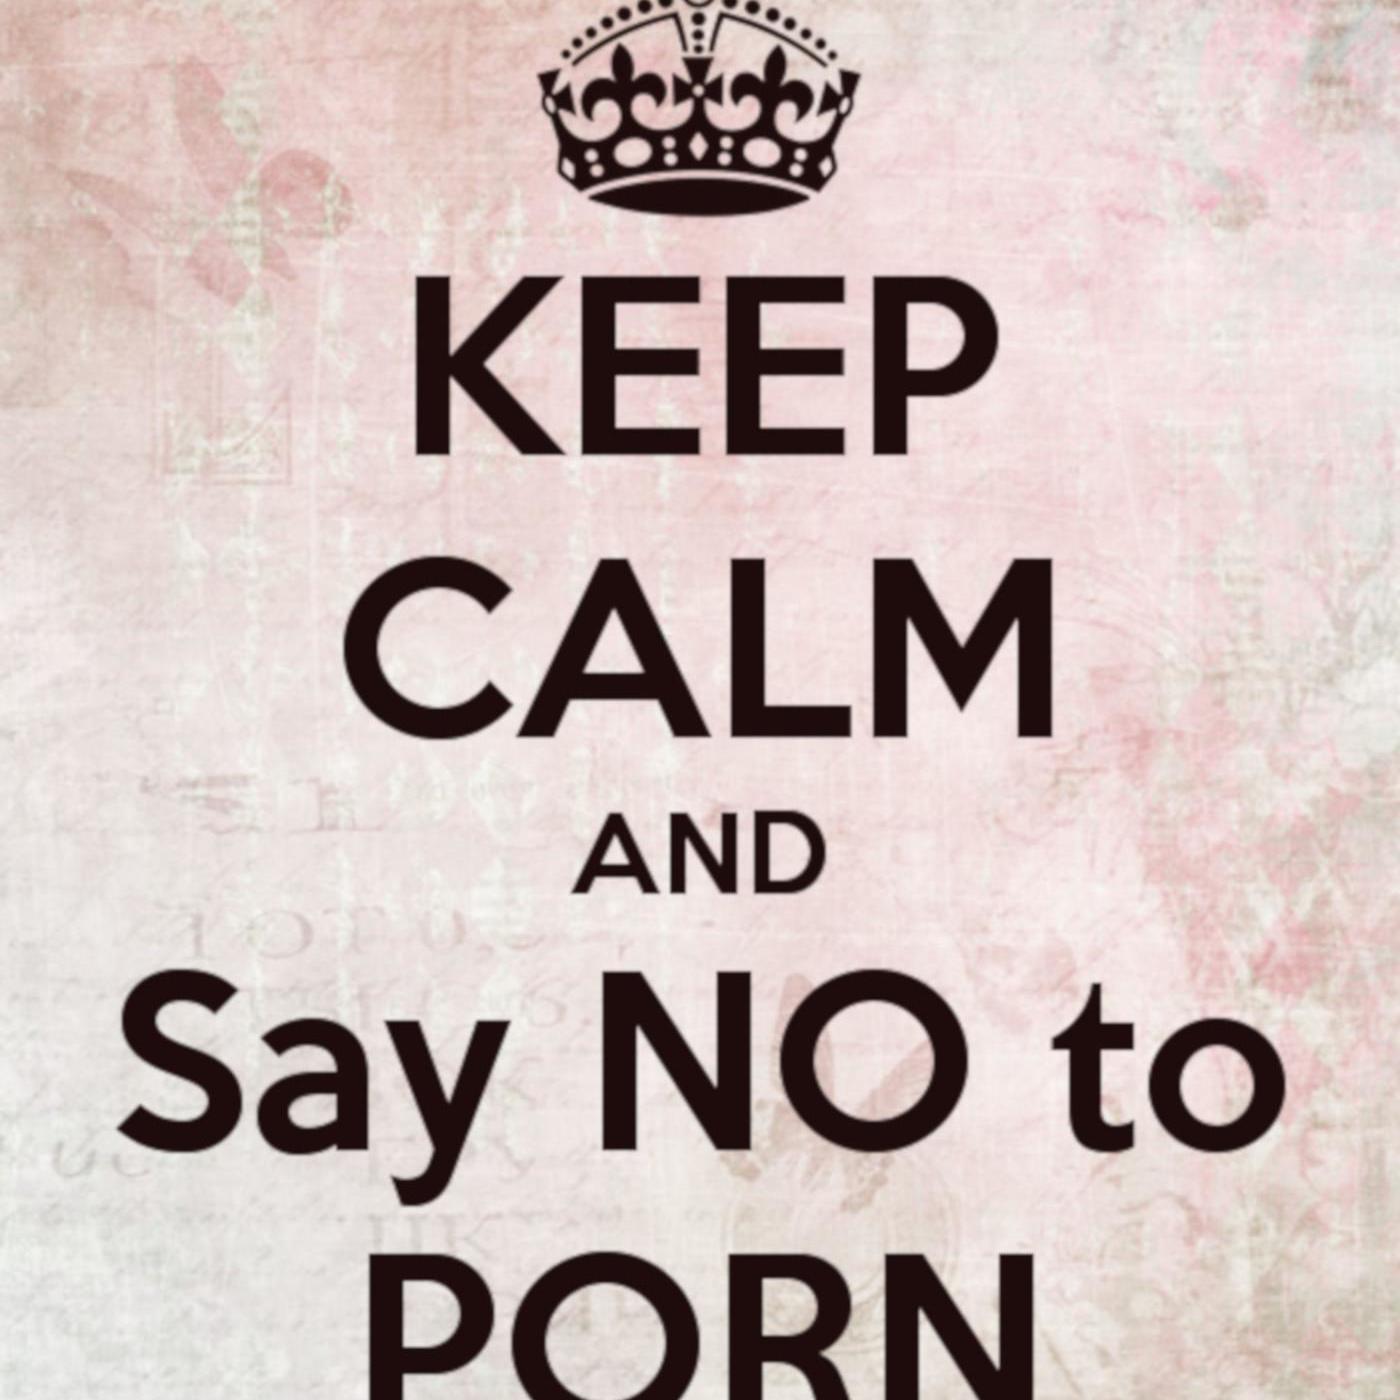 adam tresidder recommends say no to porn pic